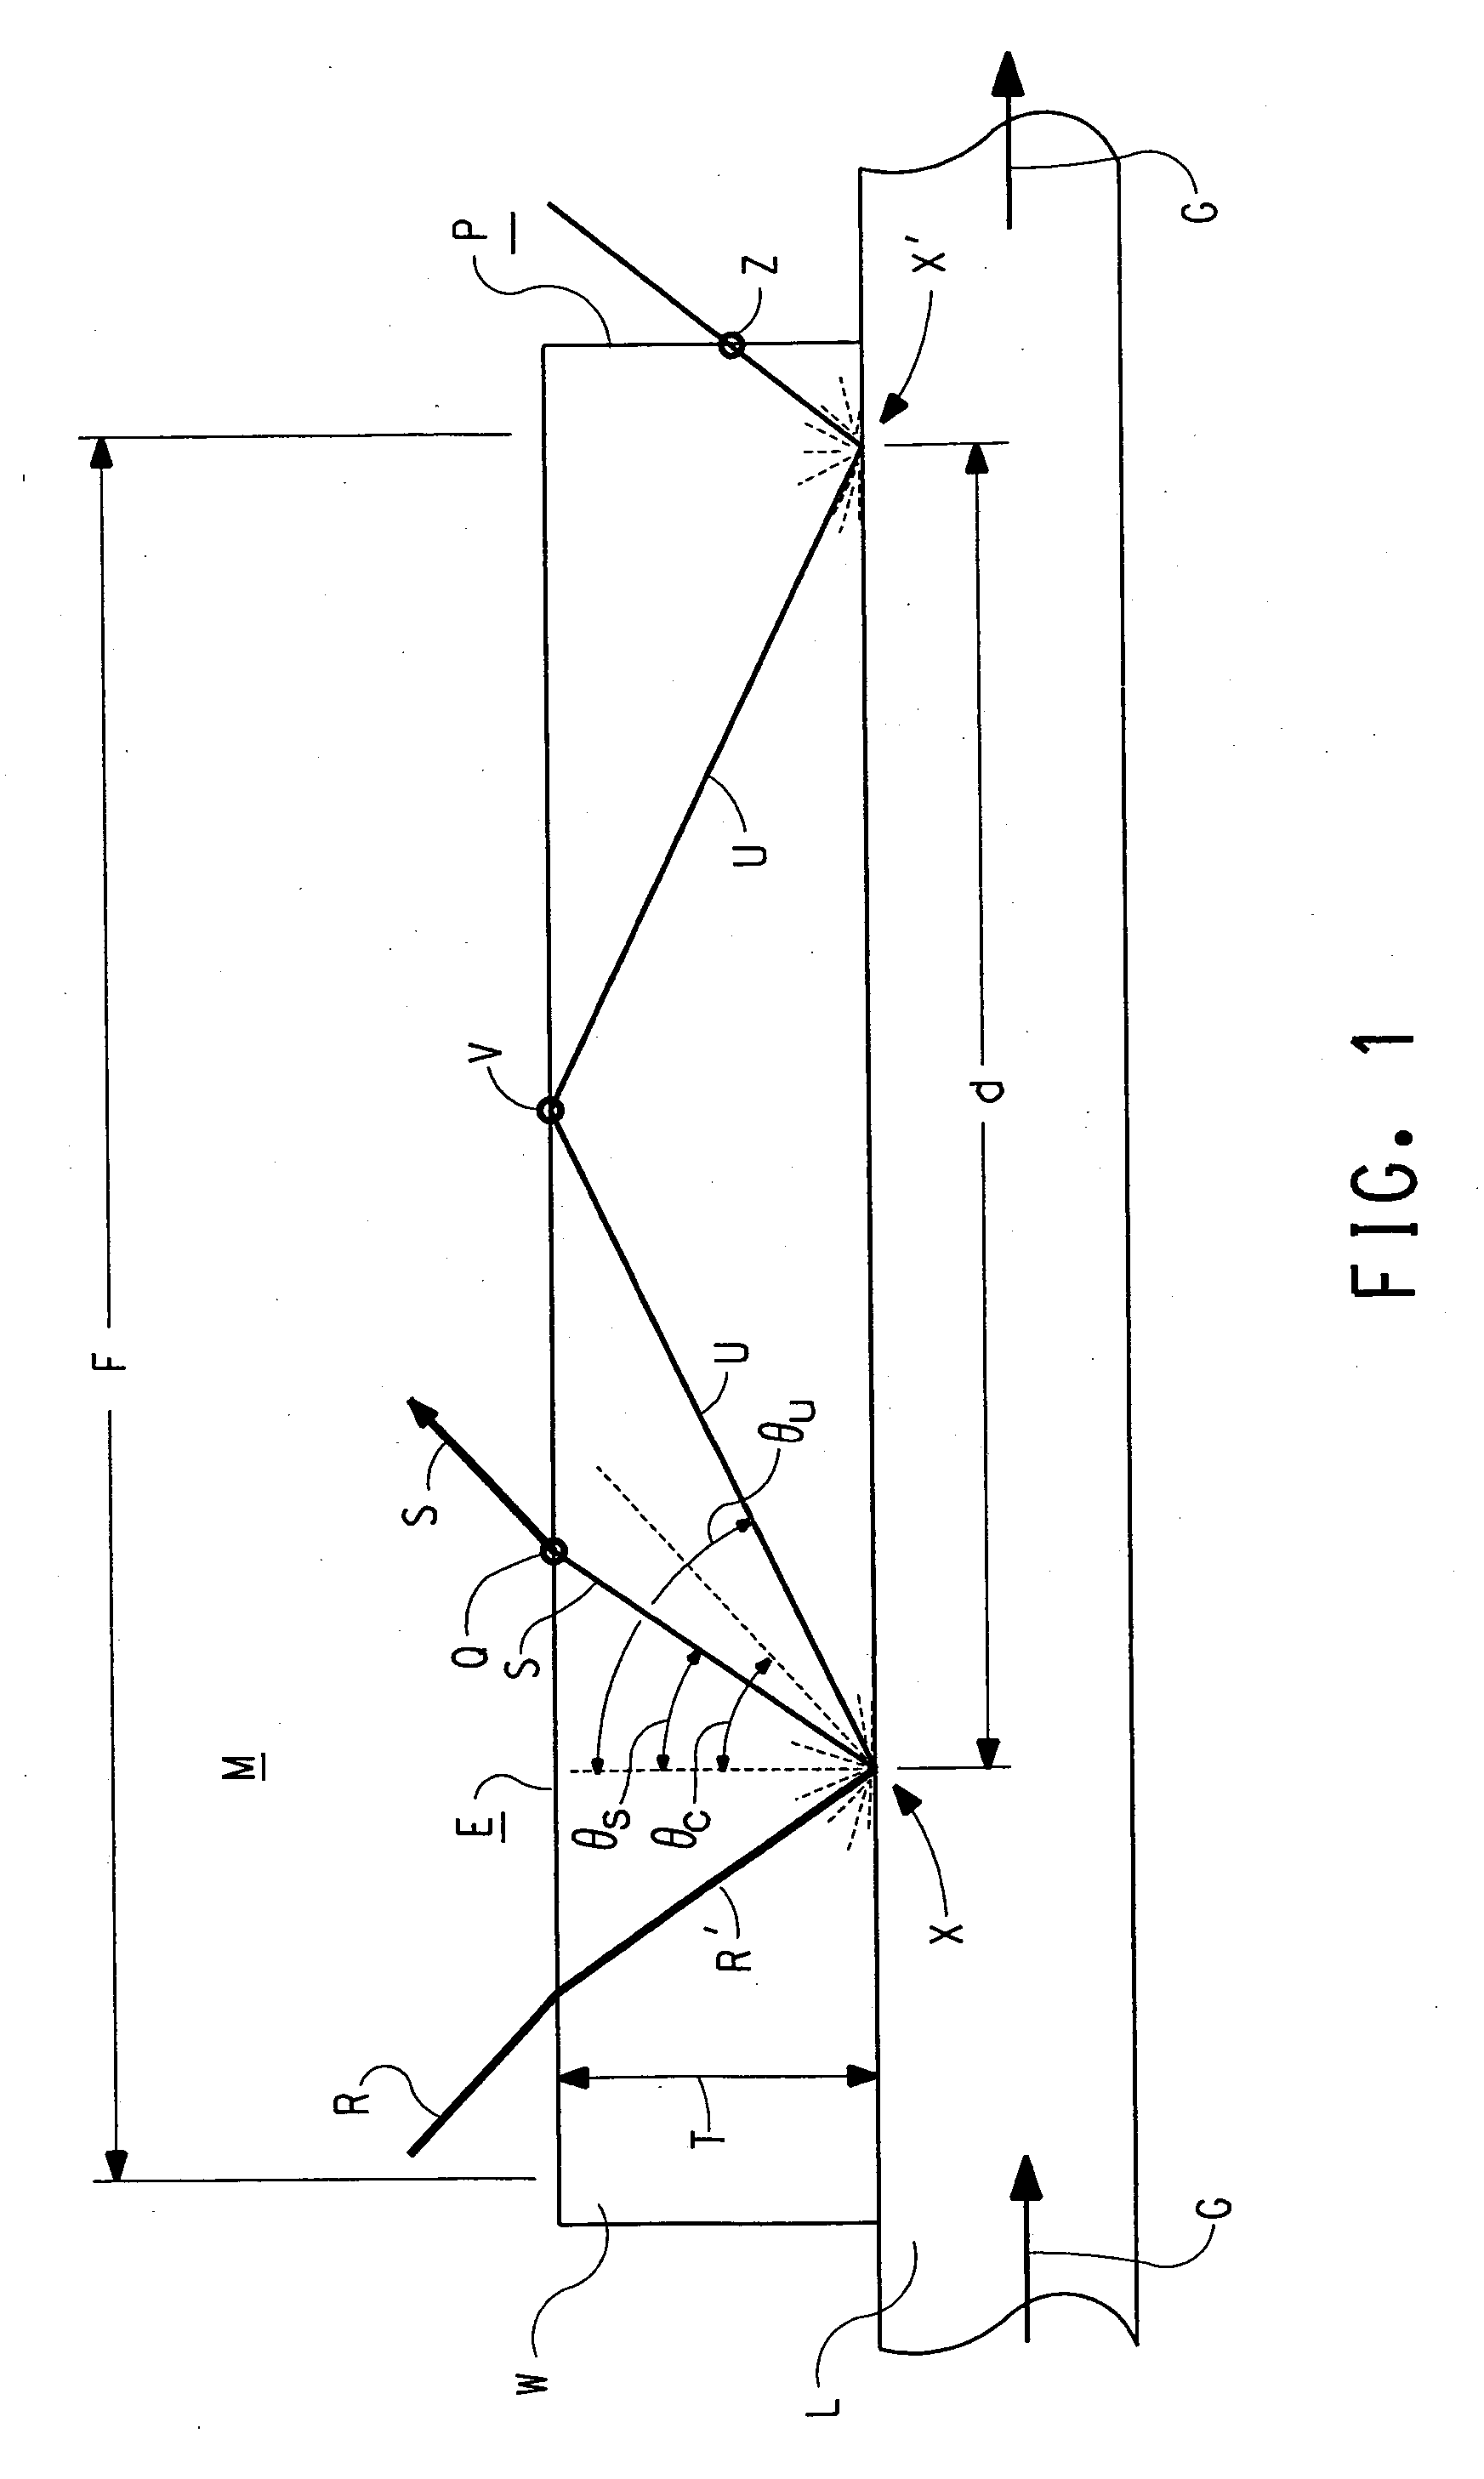 Liquid measurement cell having a transparent partition therein